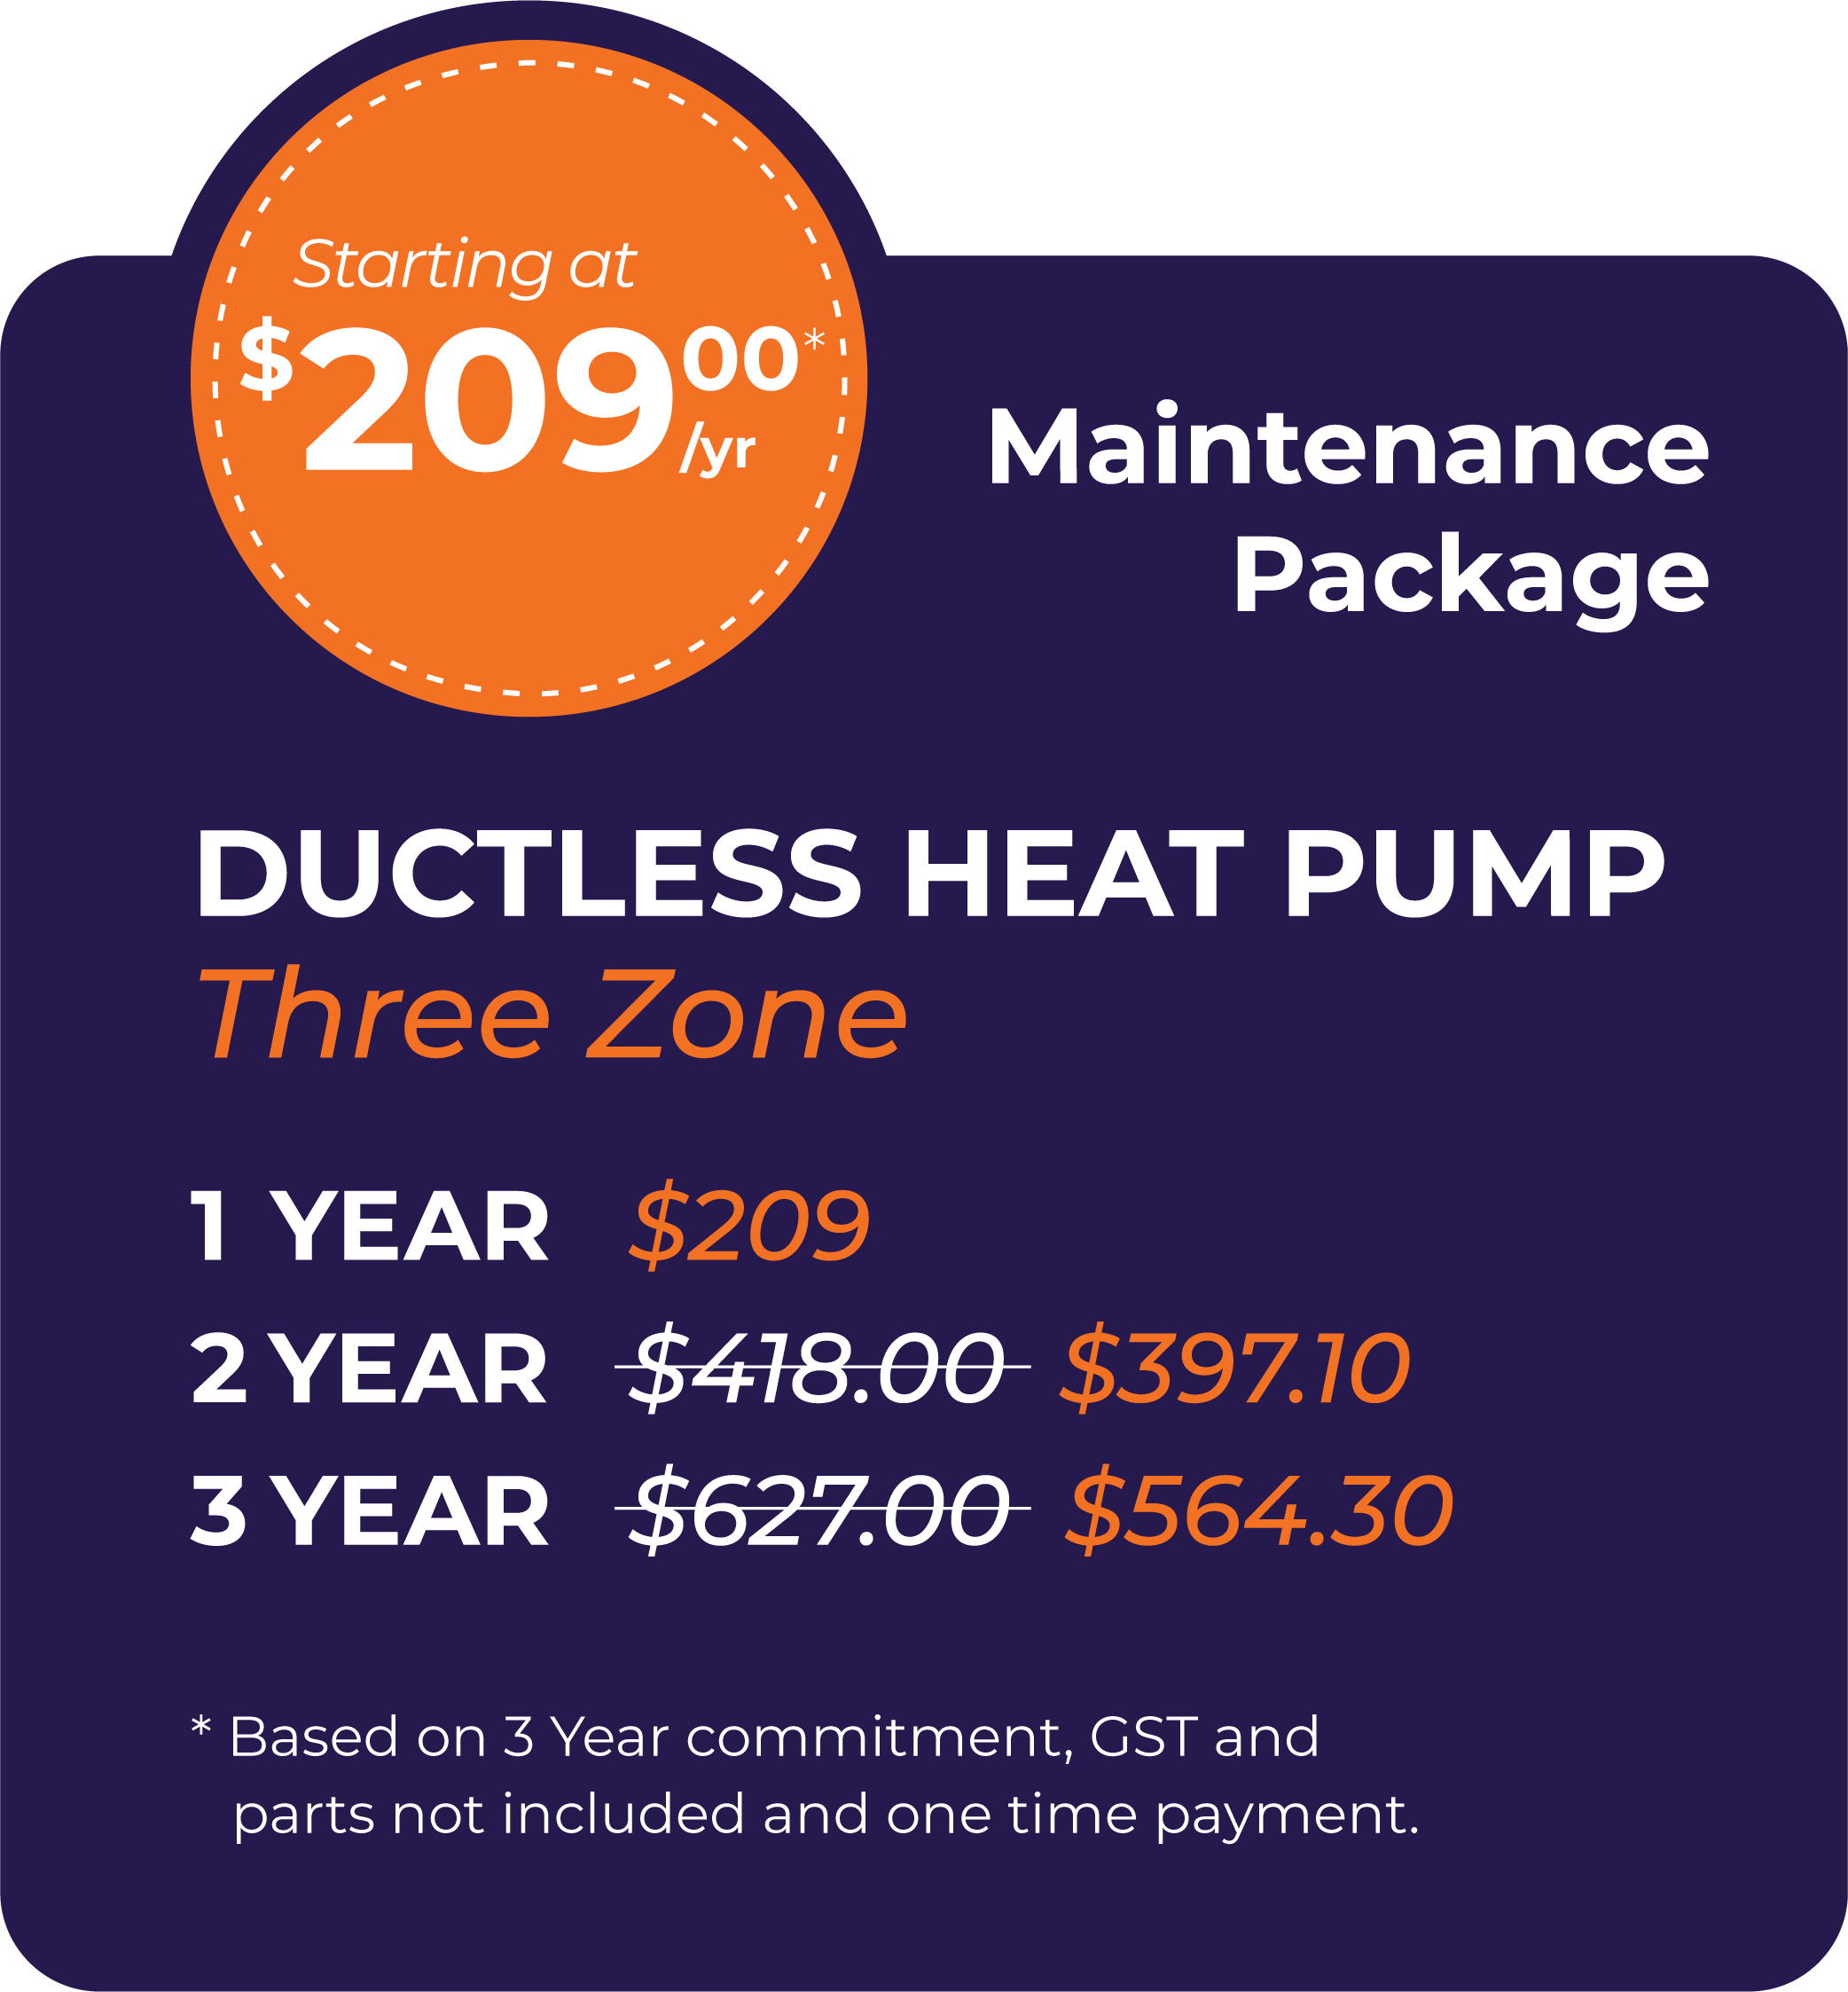 Ductless Heat Pump Three Zone Package